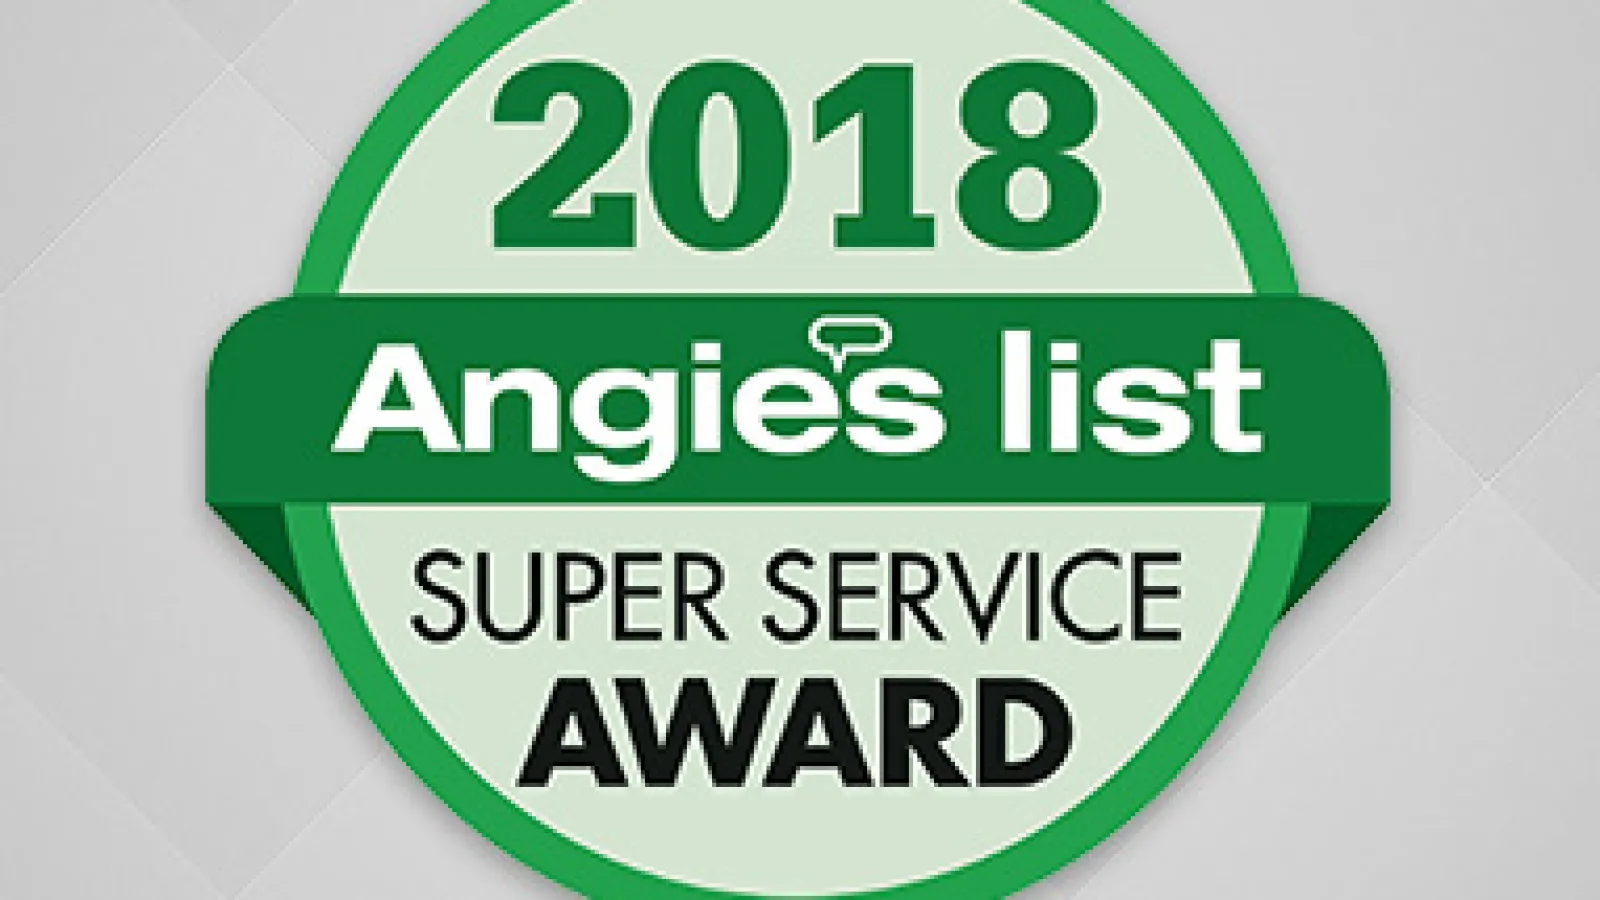 2018 Angie's List Super Service Award Bestowed Upon Sir Grout's Franchises for Their Quality Hard Surface Restoration Services